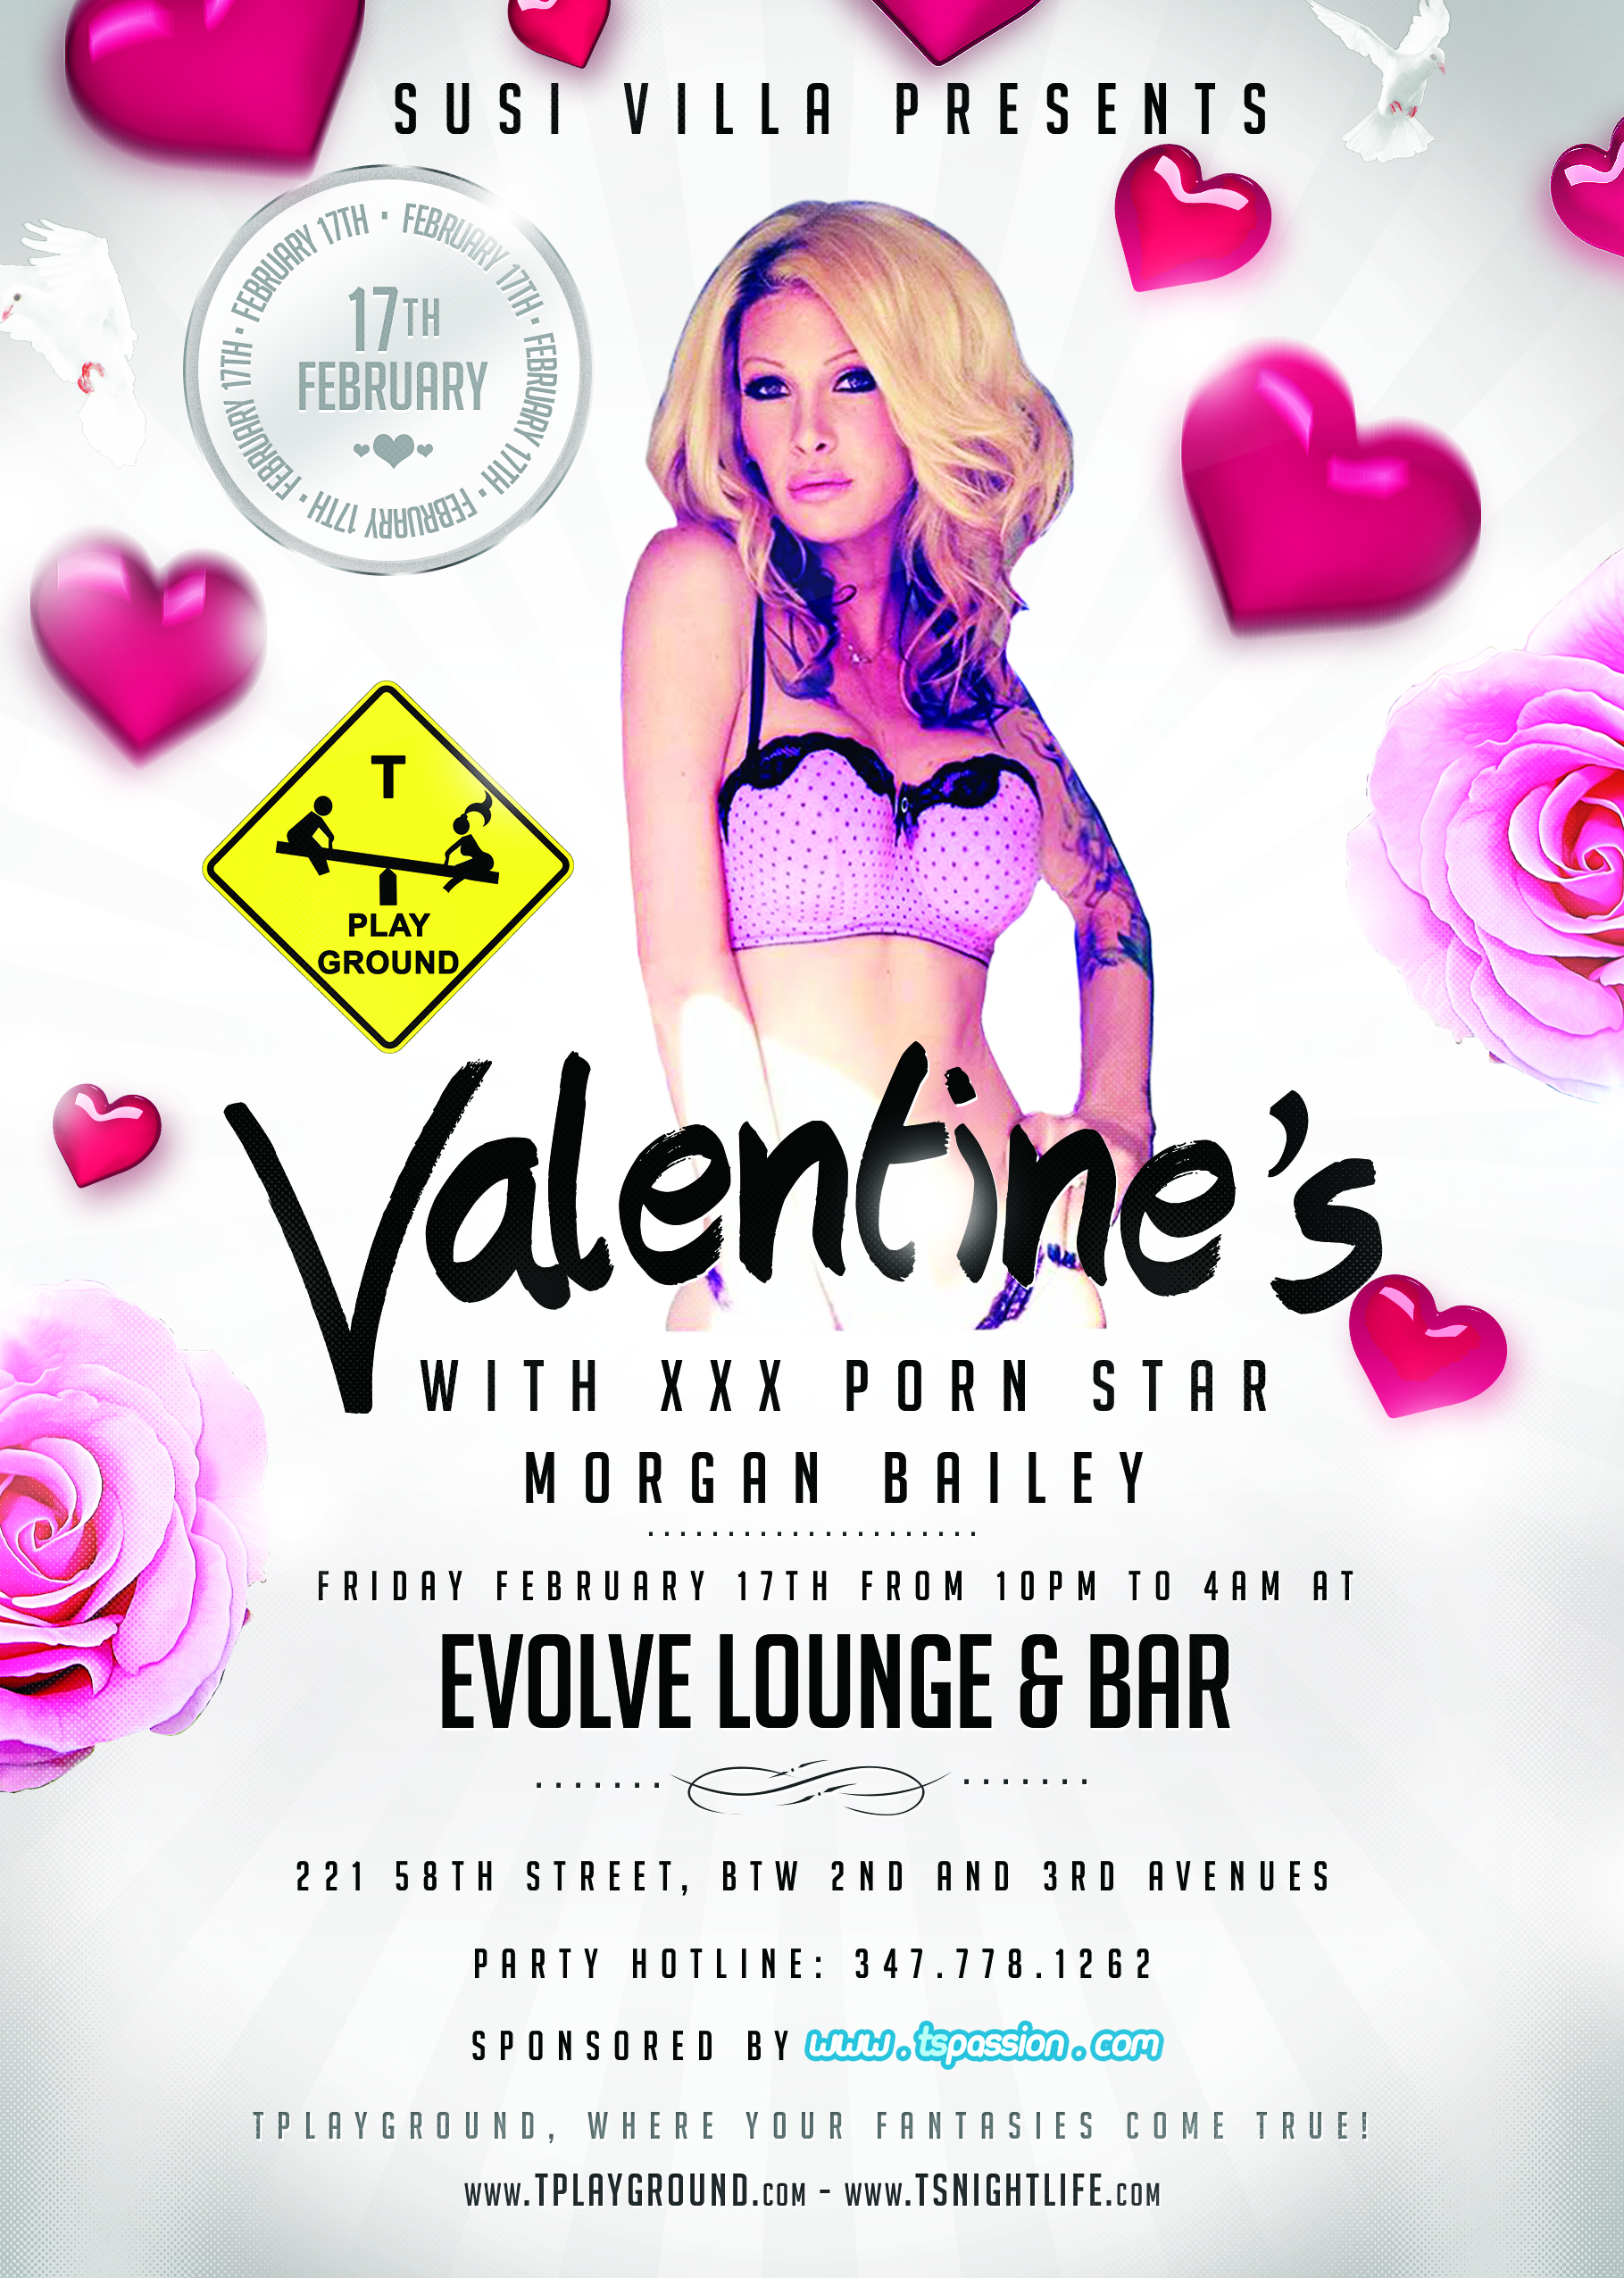 xxx porn star morgan bailey is your celebrity guest for tplaygrounds valentines day celebration